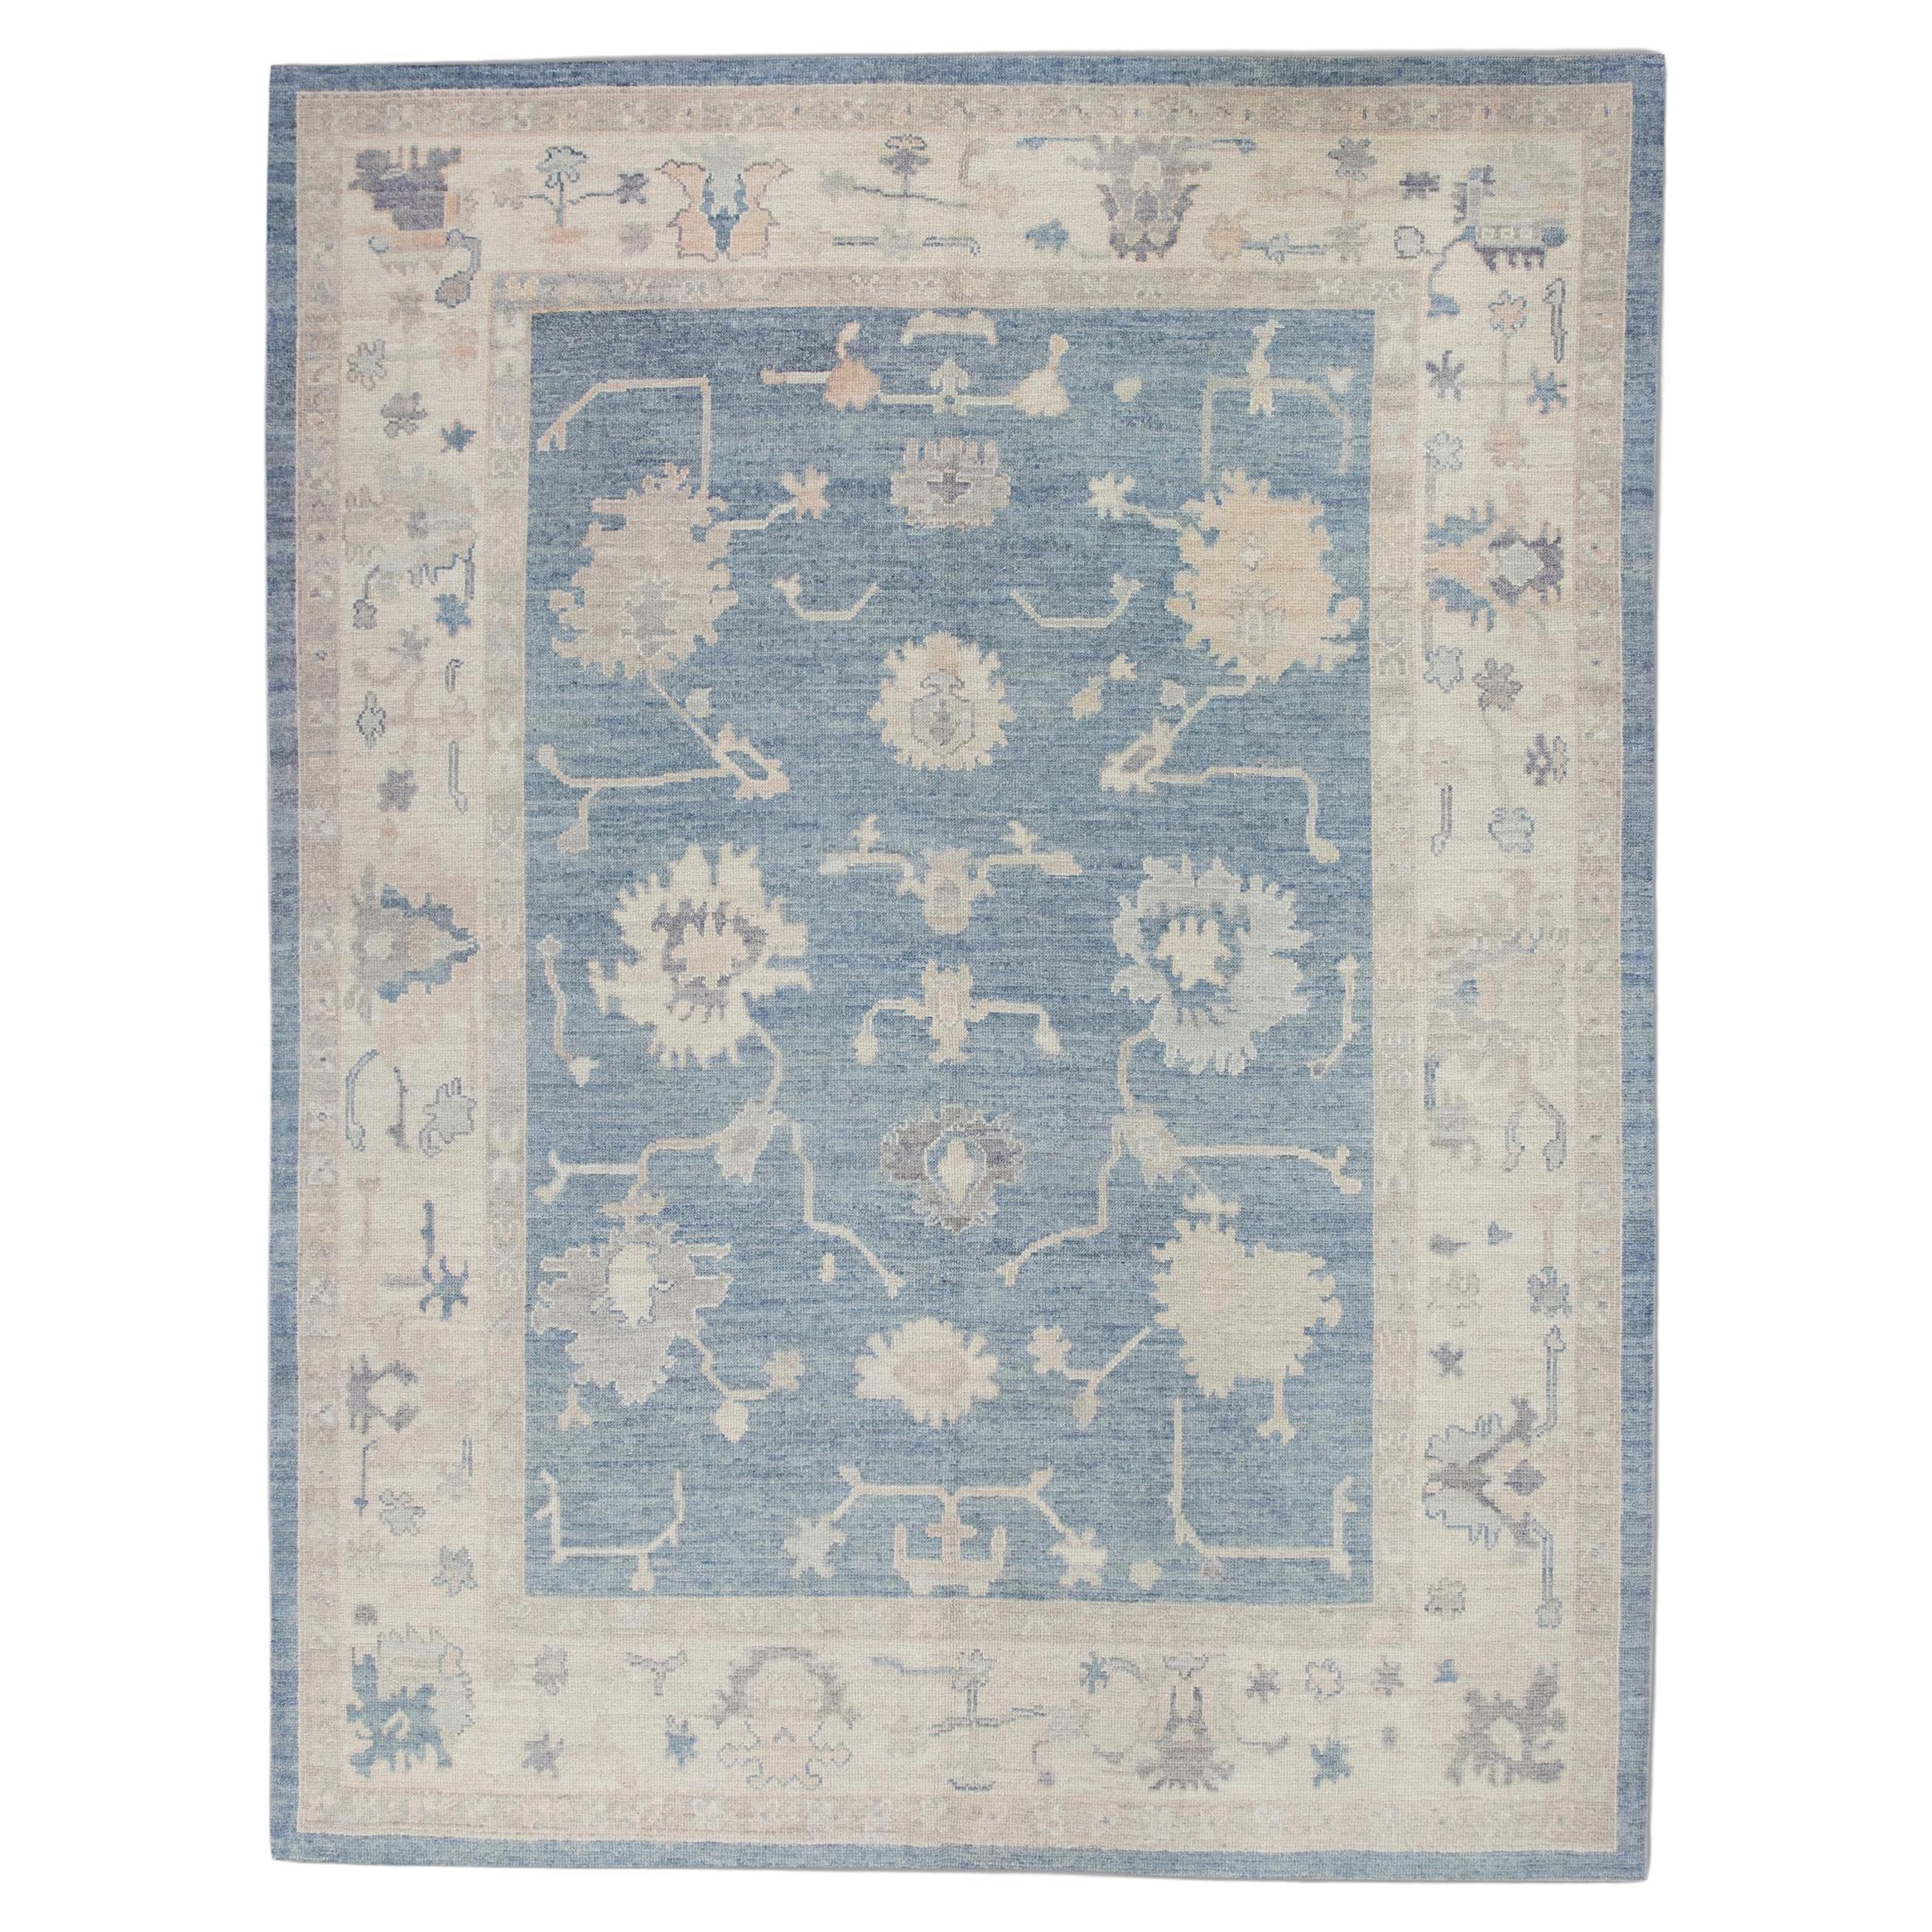 Blue Floral Handwoven Wool Turkish Oushak Rug 8'1" x 10'5" For Sale